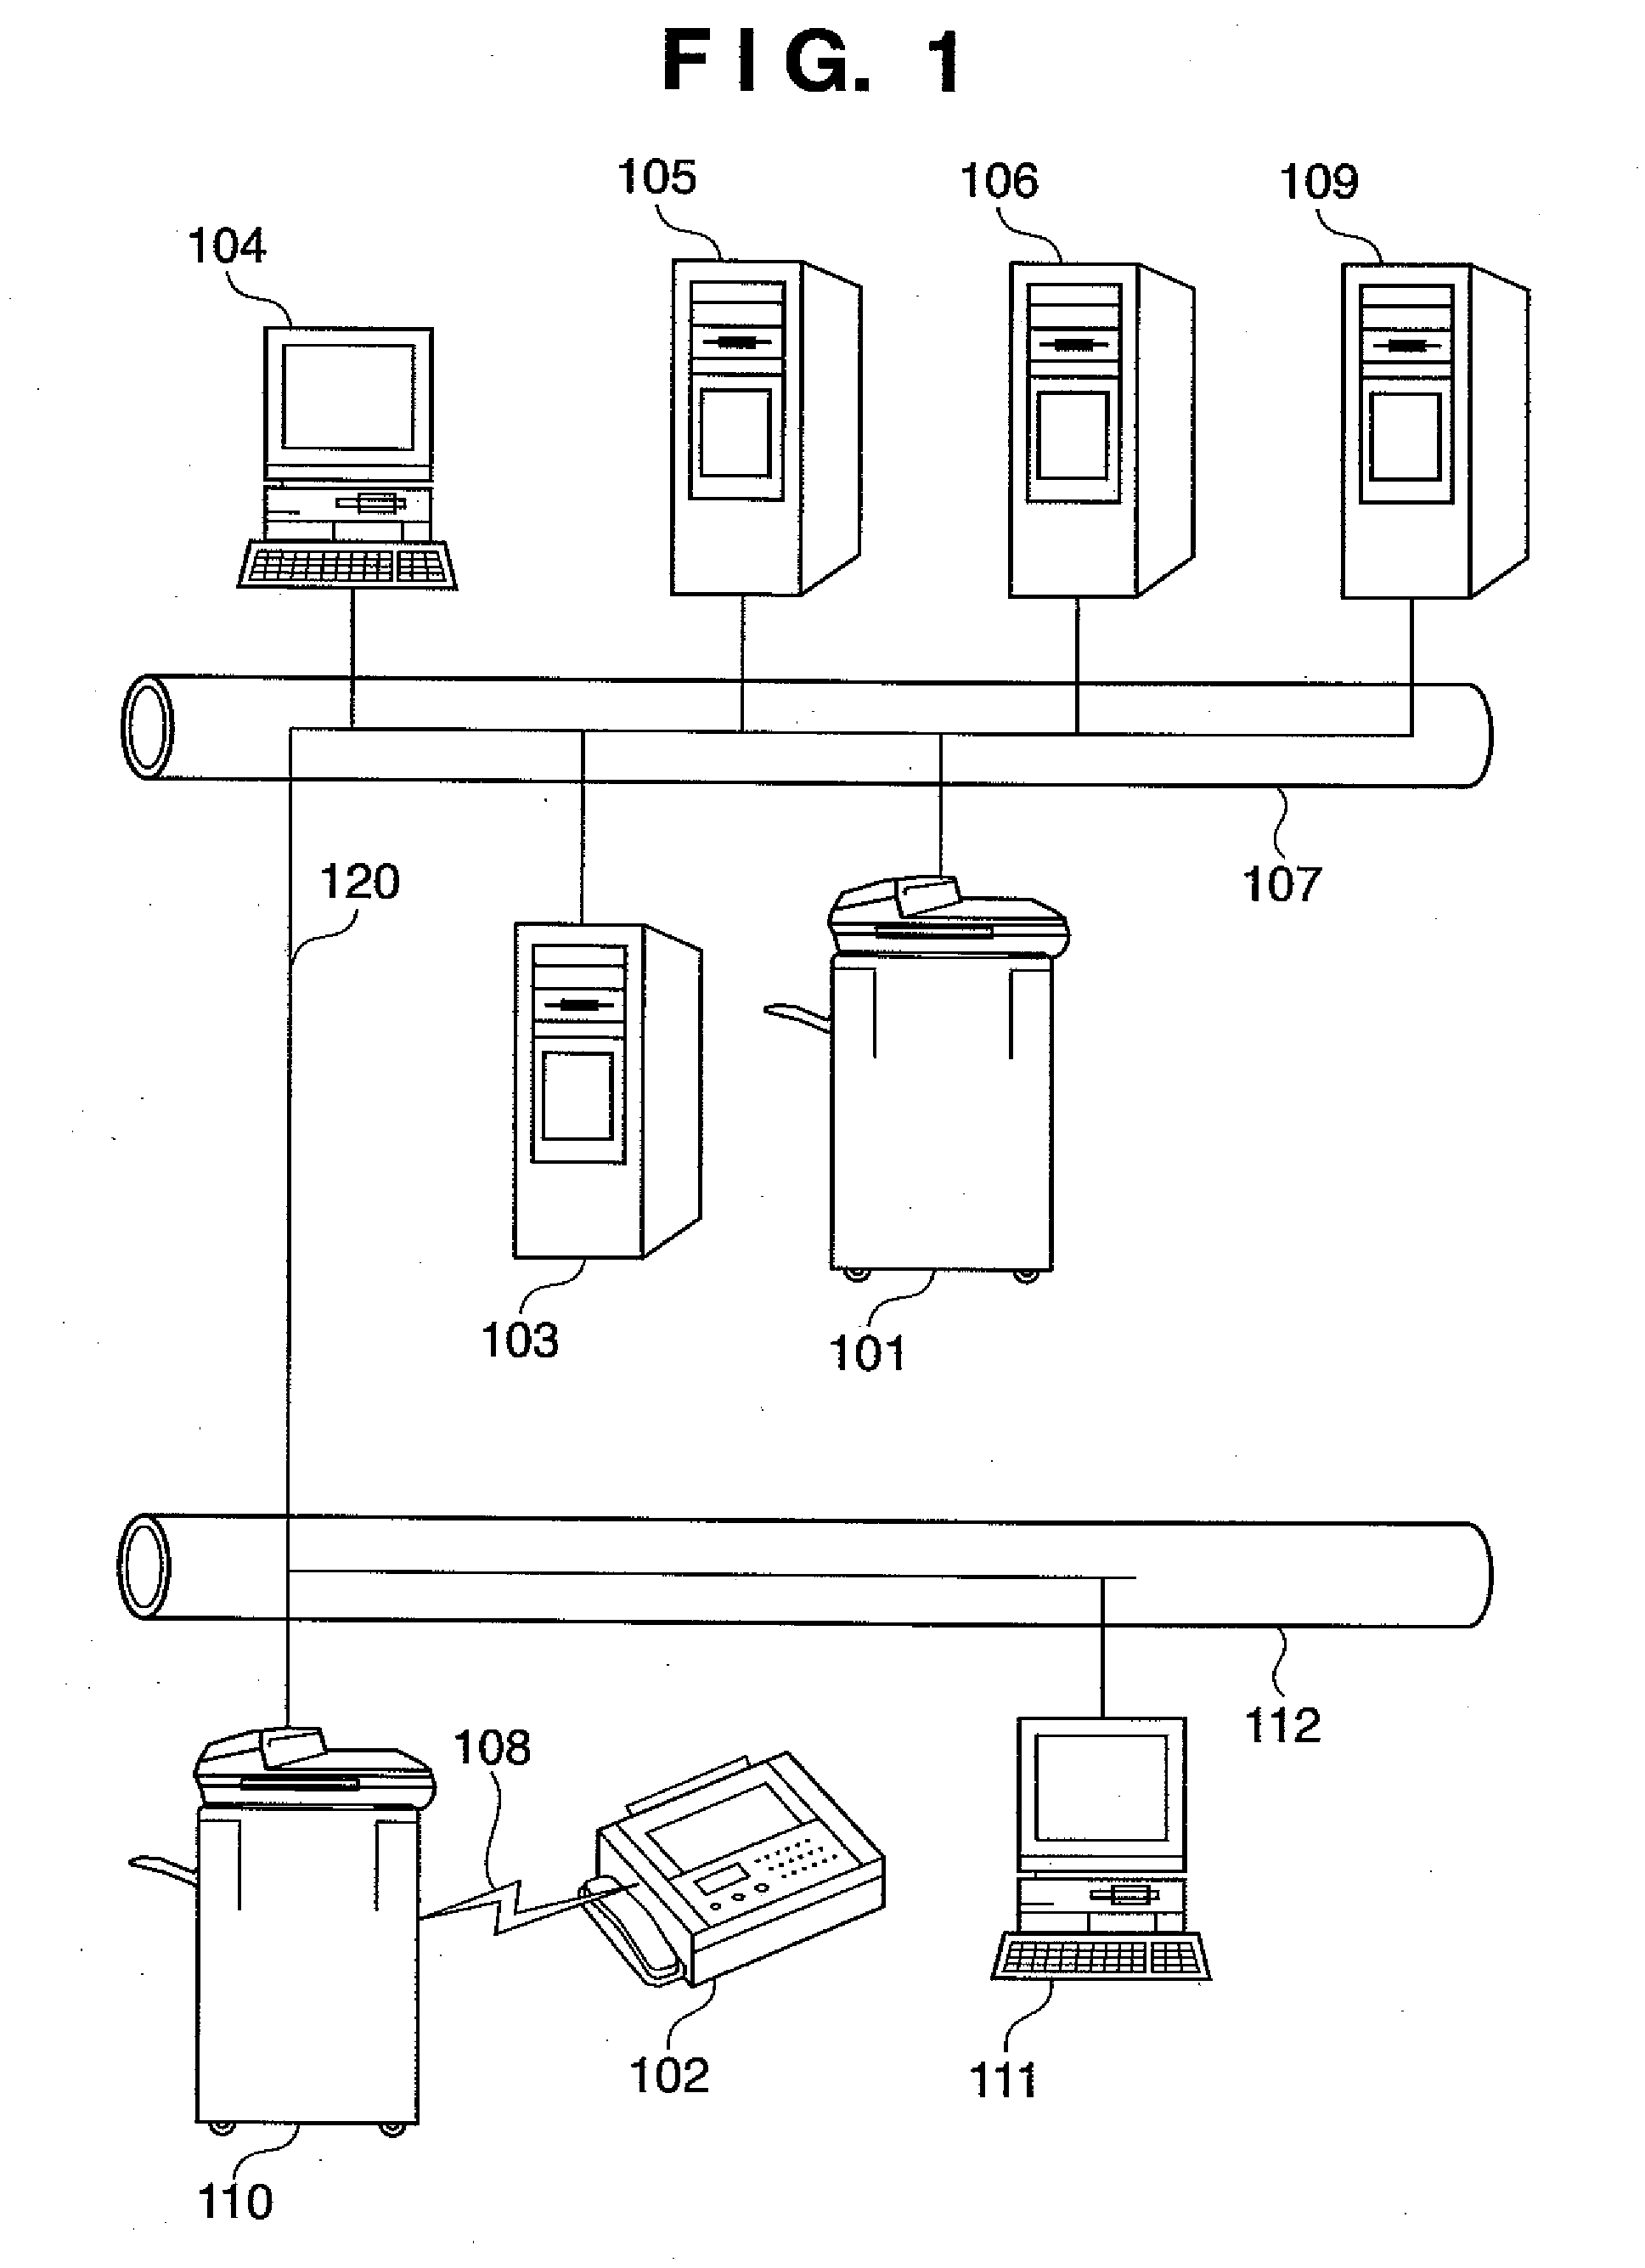 Image Processing Apparatus, Image Processing System, and Control Method Therefor